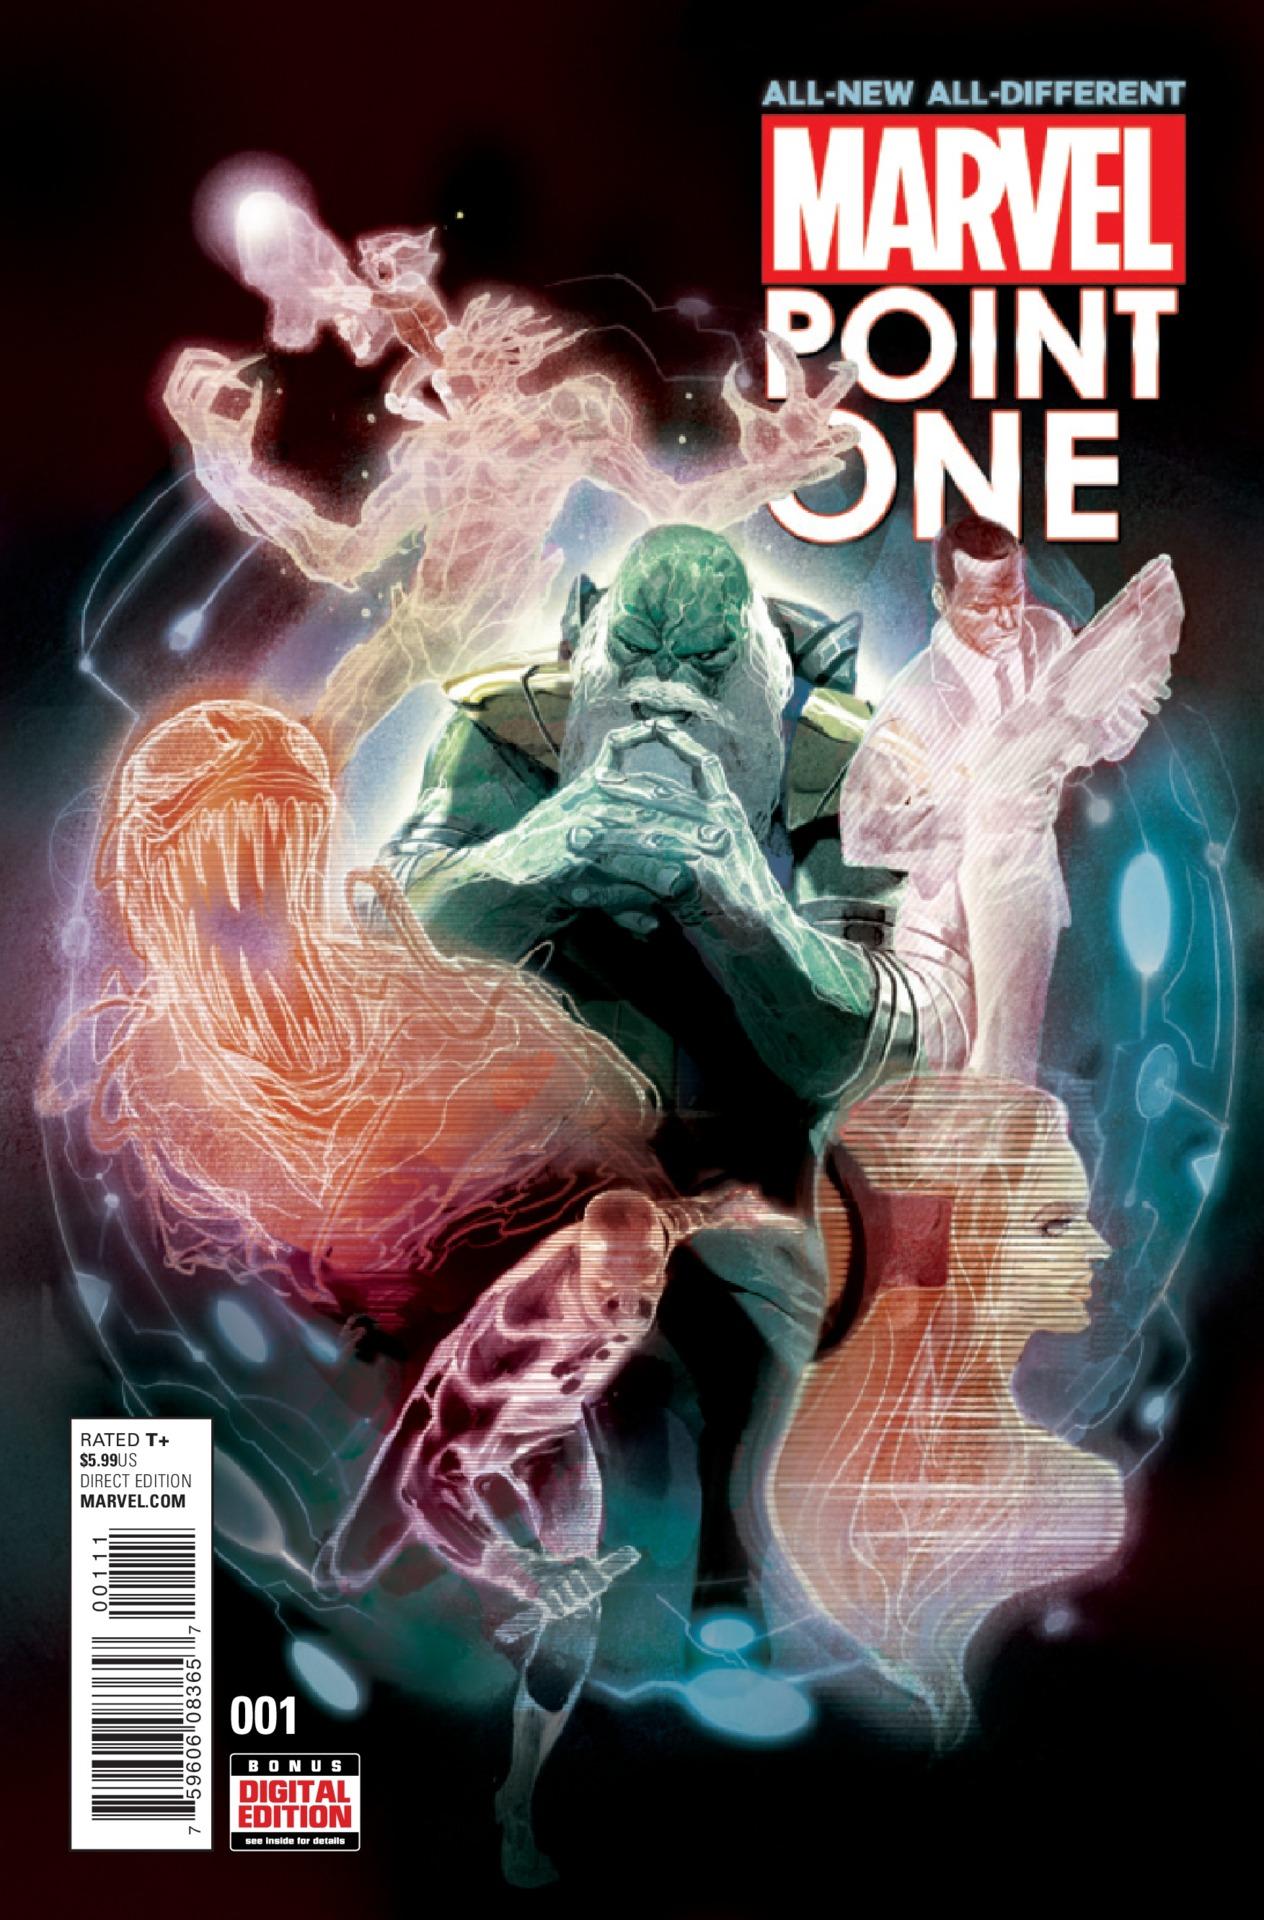 All-New, All-Different Marvel Point One Vol. 1 #1